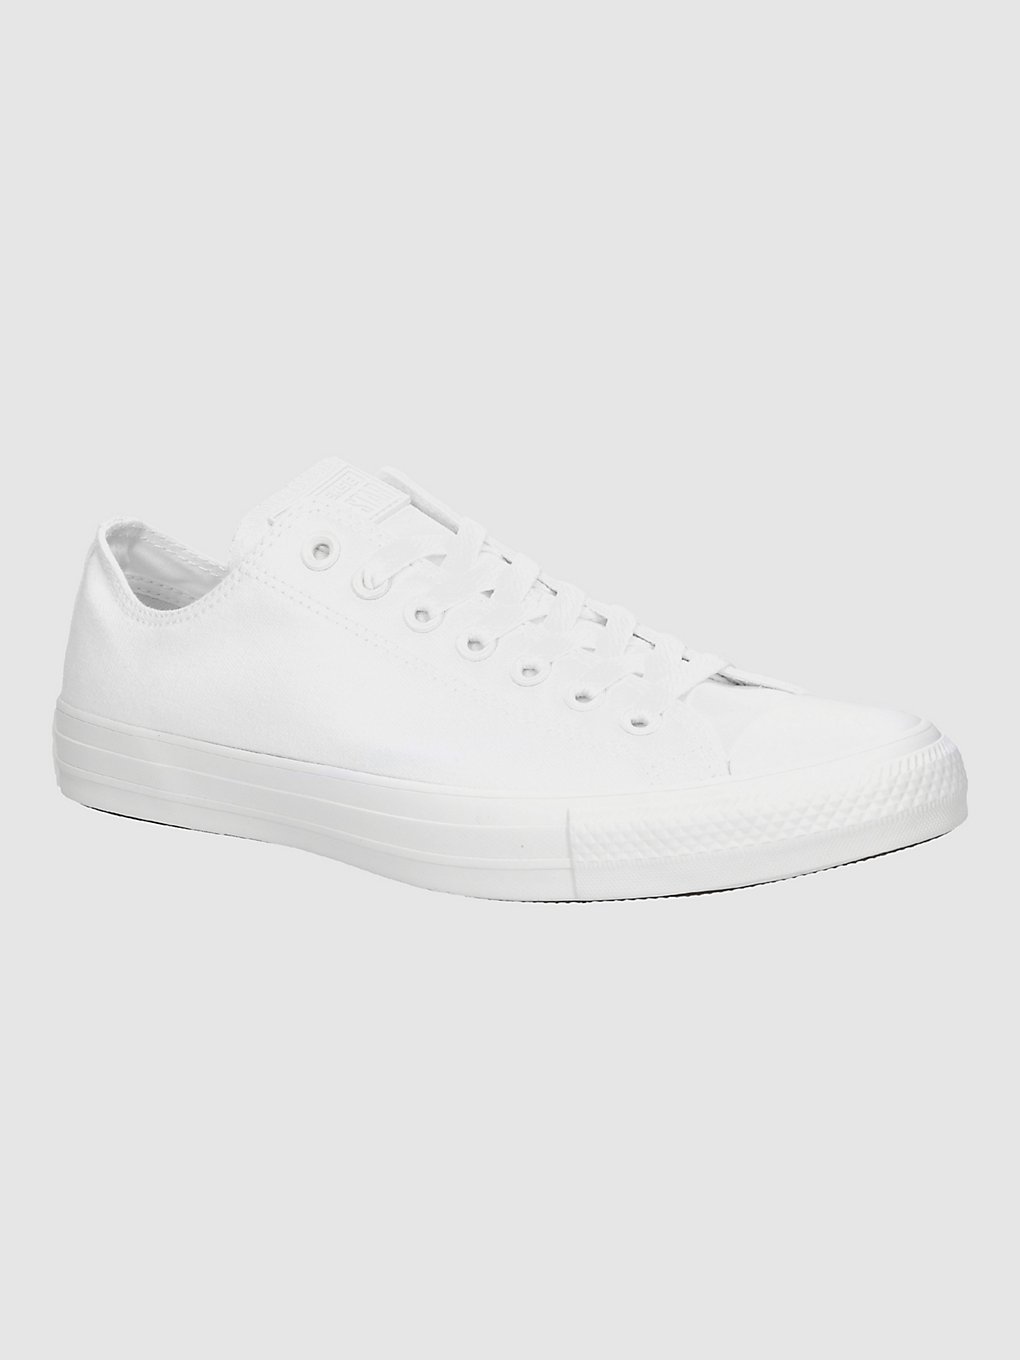 converse chuck taylor all star ox sneakers white monochrome